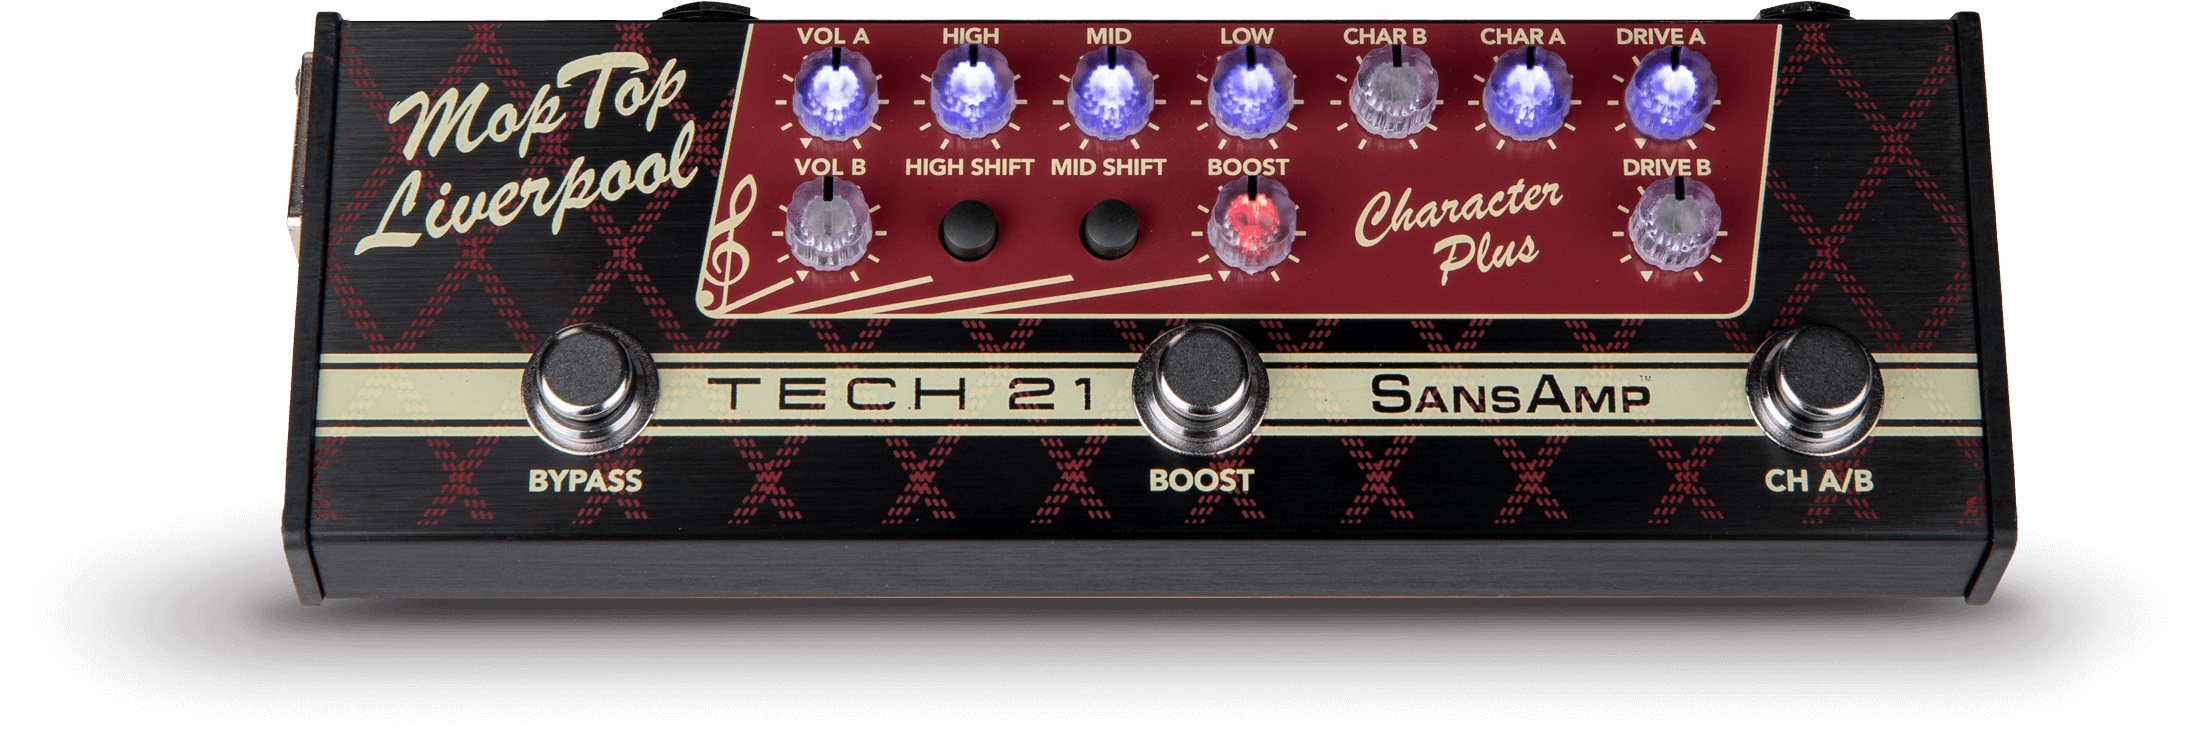 Tech 21 Mop Top Liverpool Character Series - Guitar amp modeling simulation - Variation 1